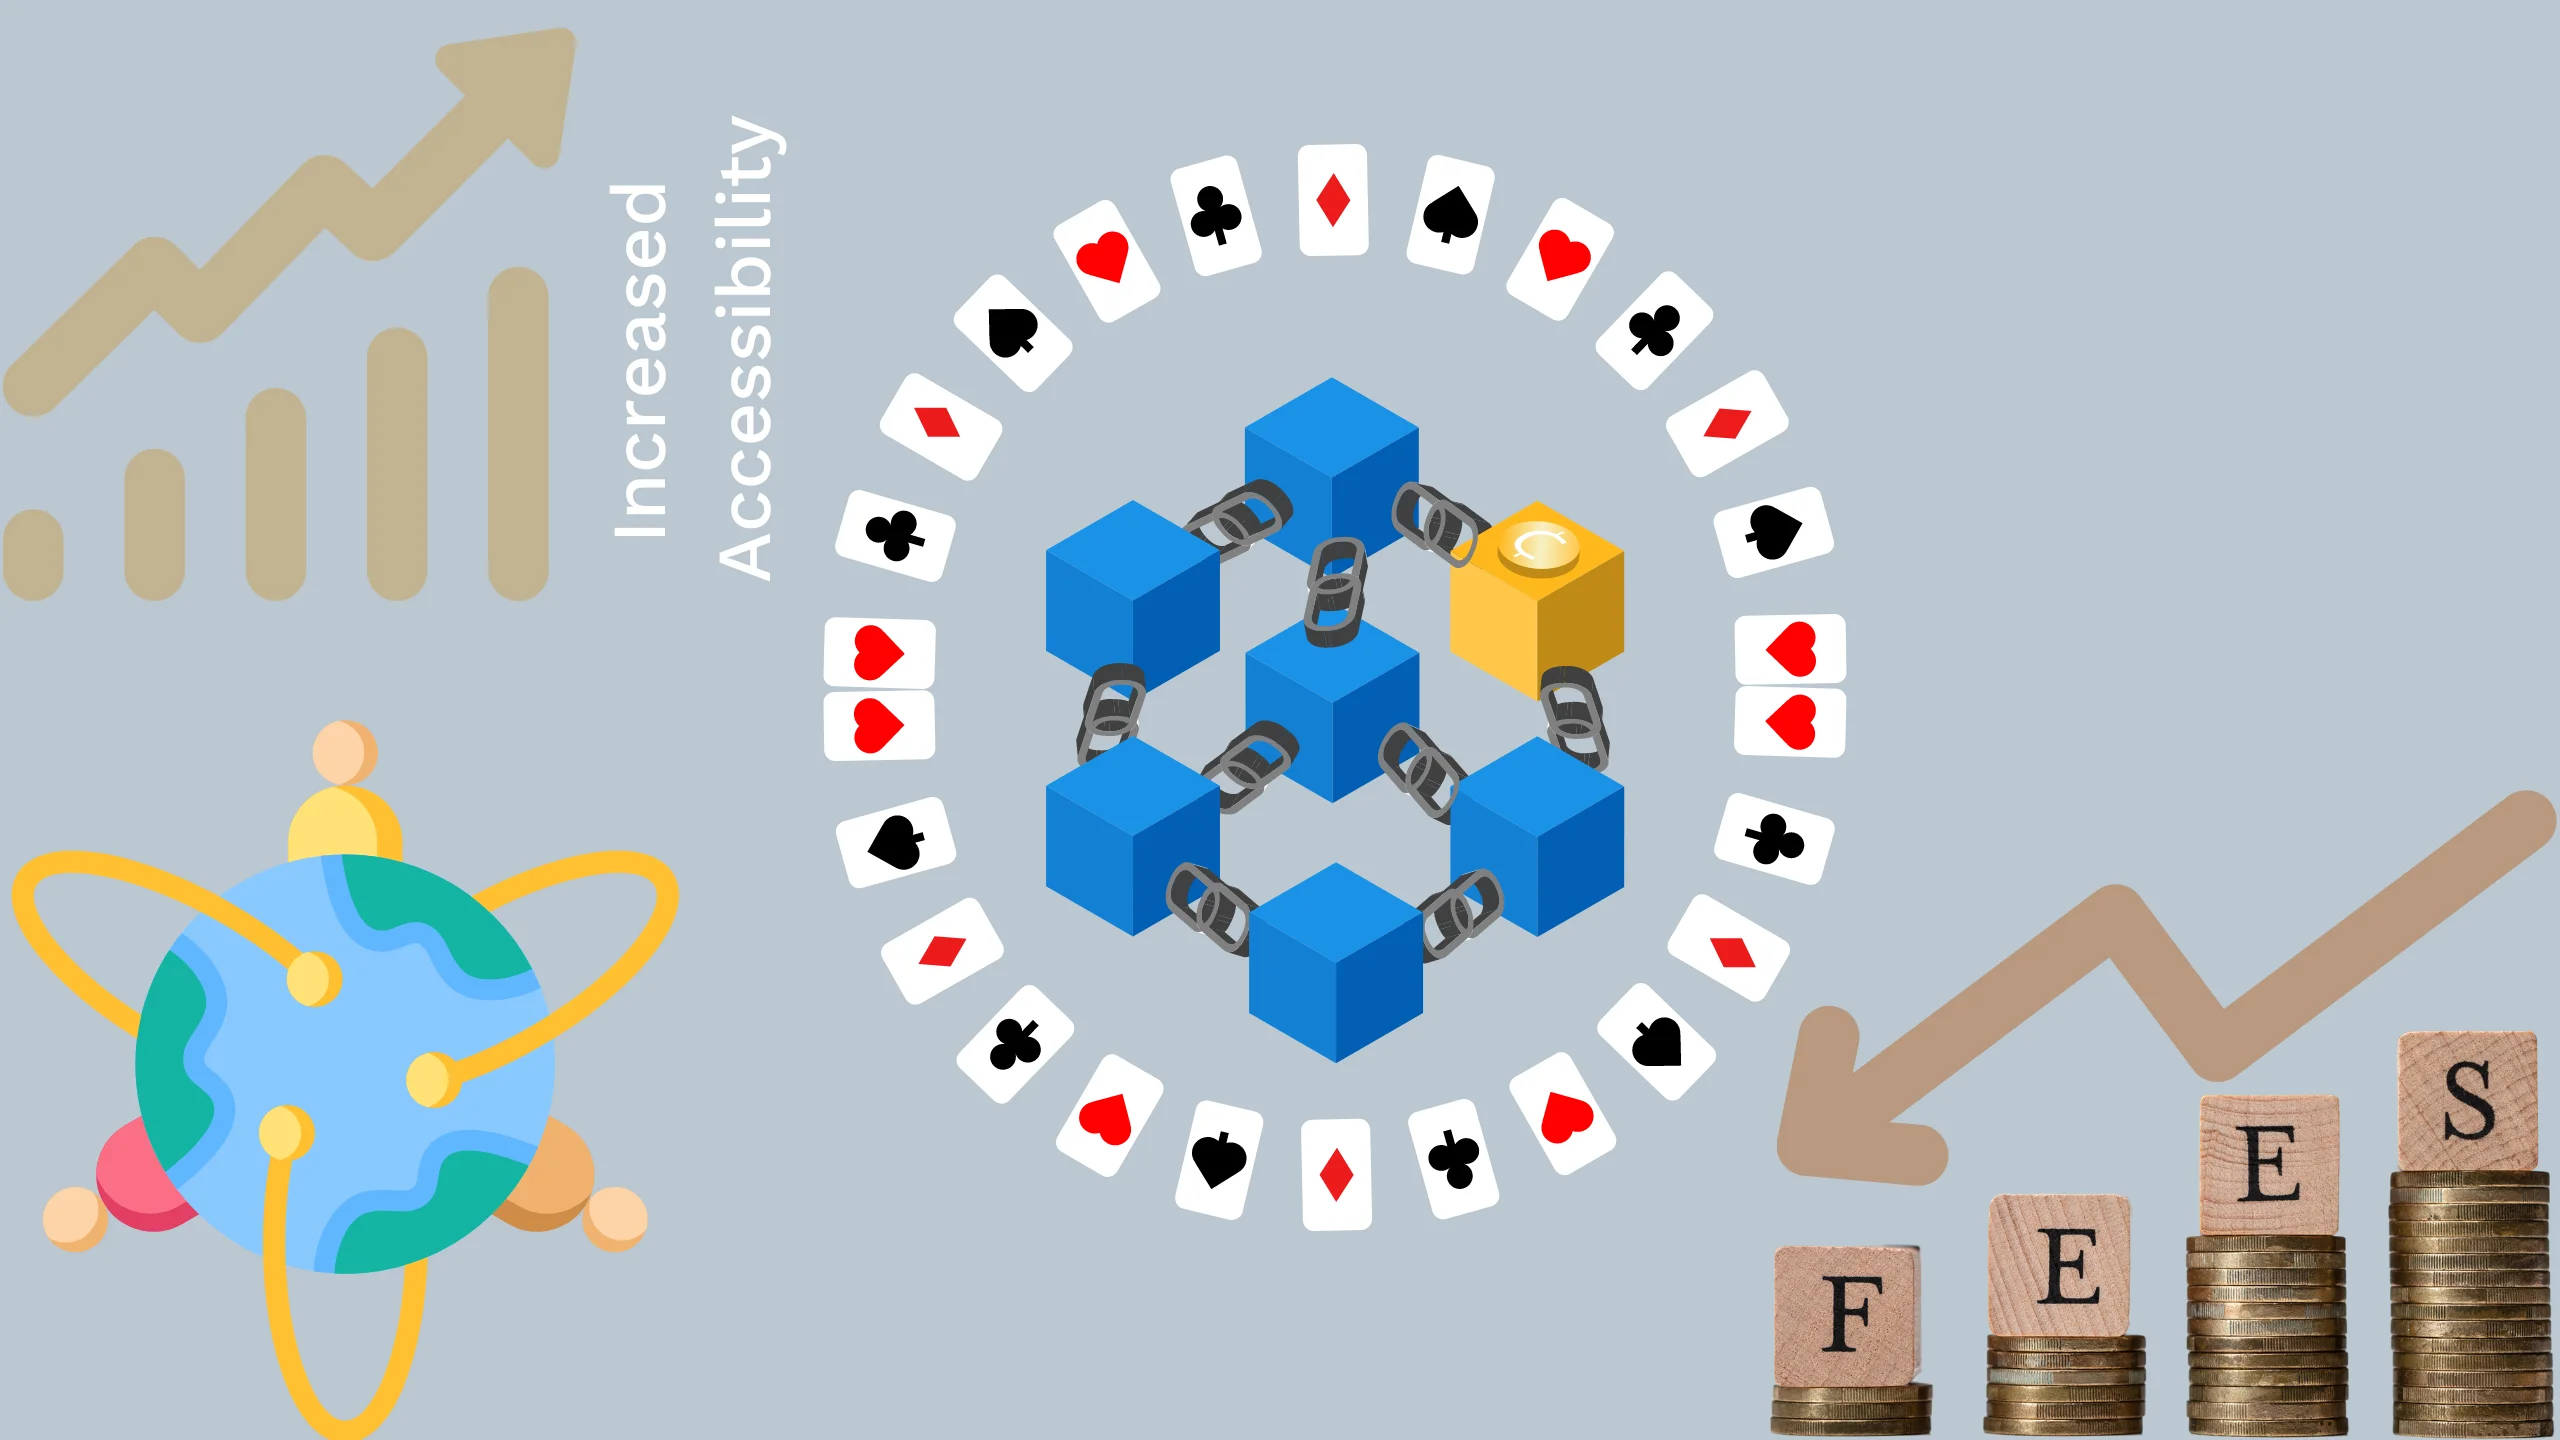 Illustration showing increased accessibility in poker games, featuring diverse players connecting from different devices and locations worldwide.